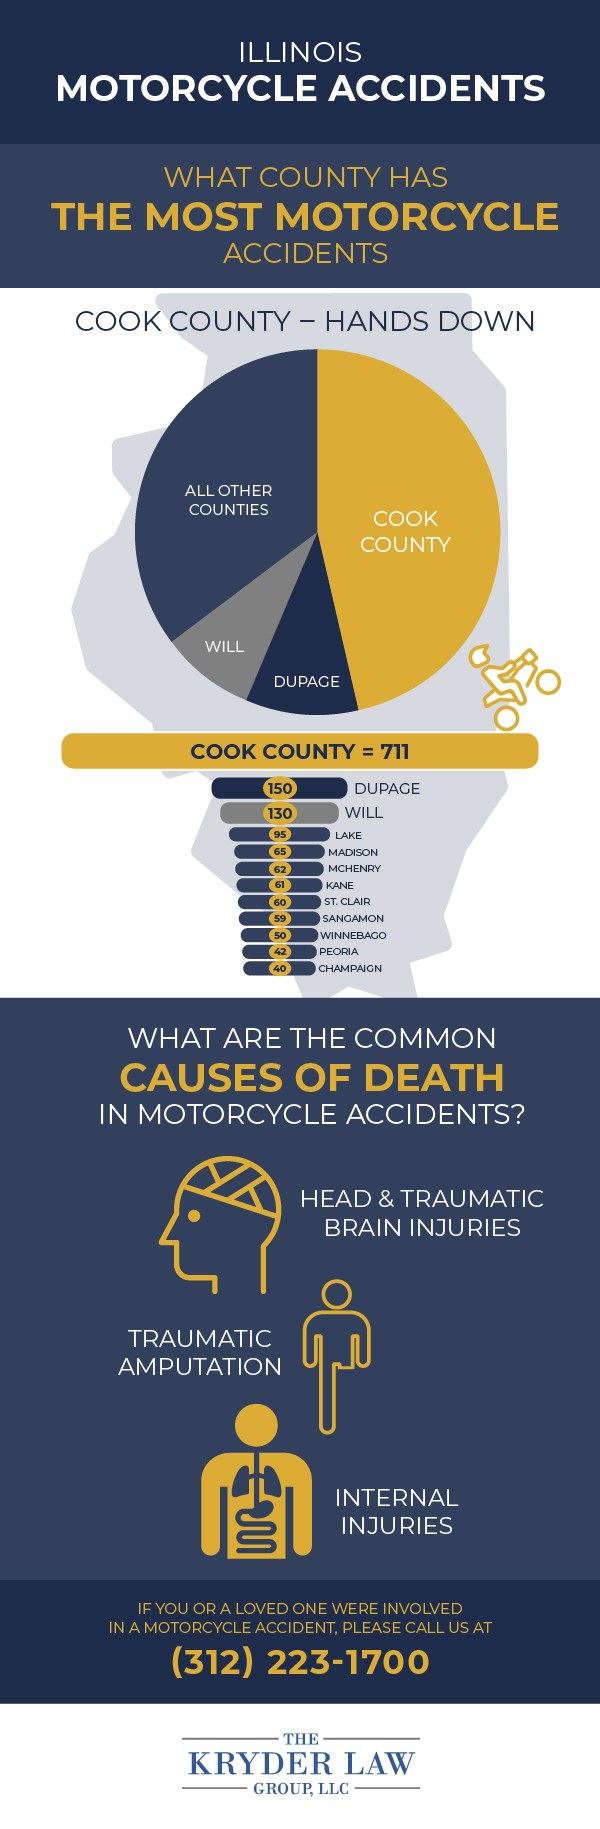 Illinois Motorcycle Accidents Infographic 2